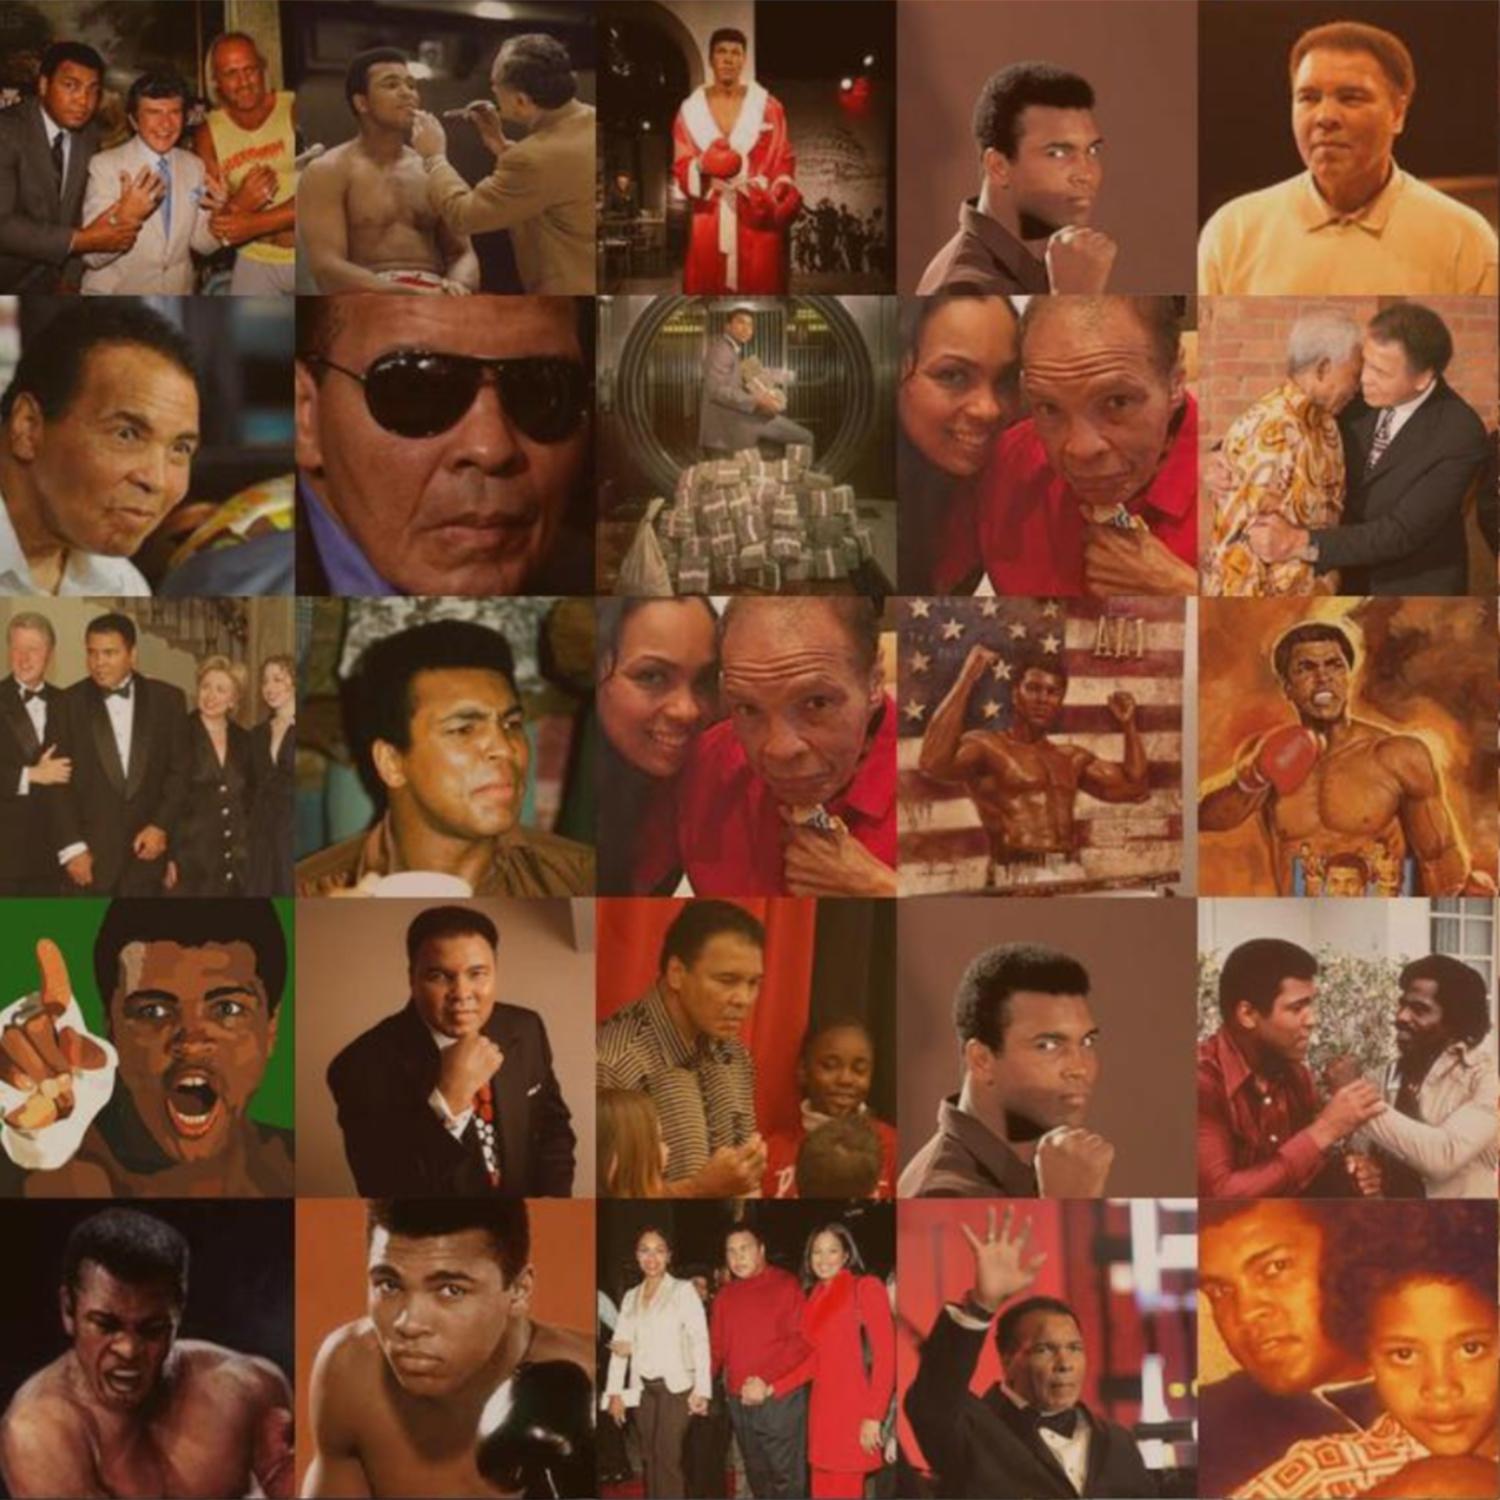 Mohamed Ali Mosaic Photos For Sale 1